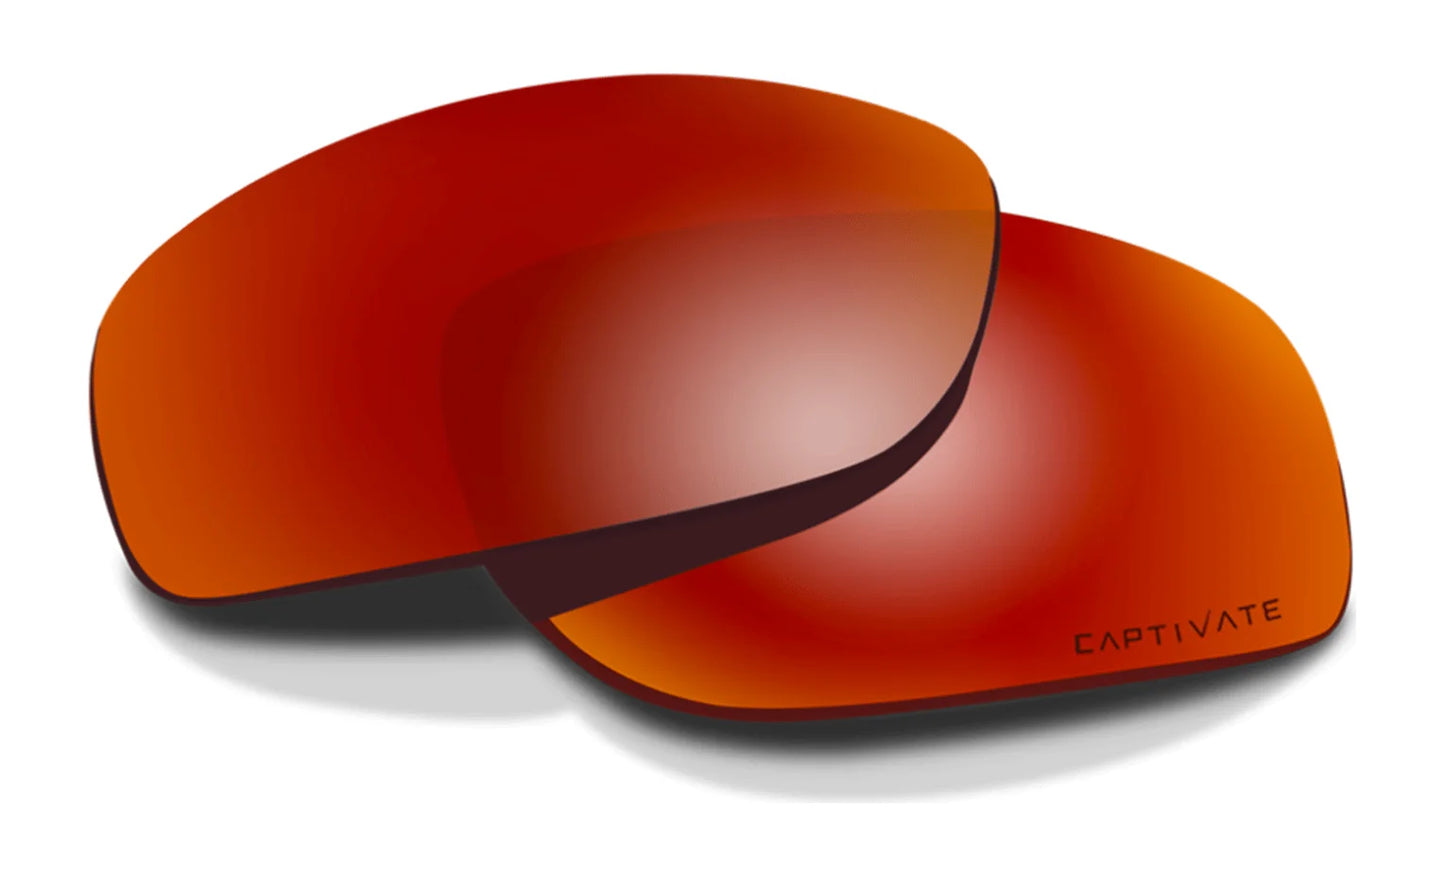 Wiley X P-17 Lens / CAPTIVATE™ Polarized Red Mirror